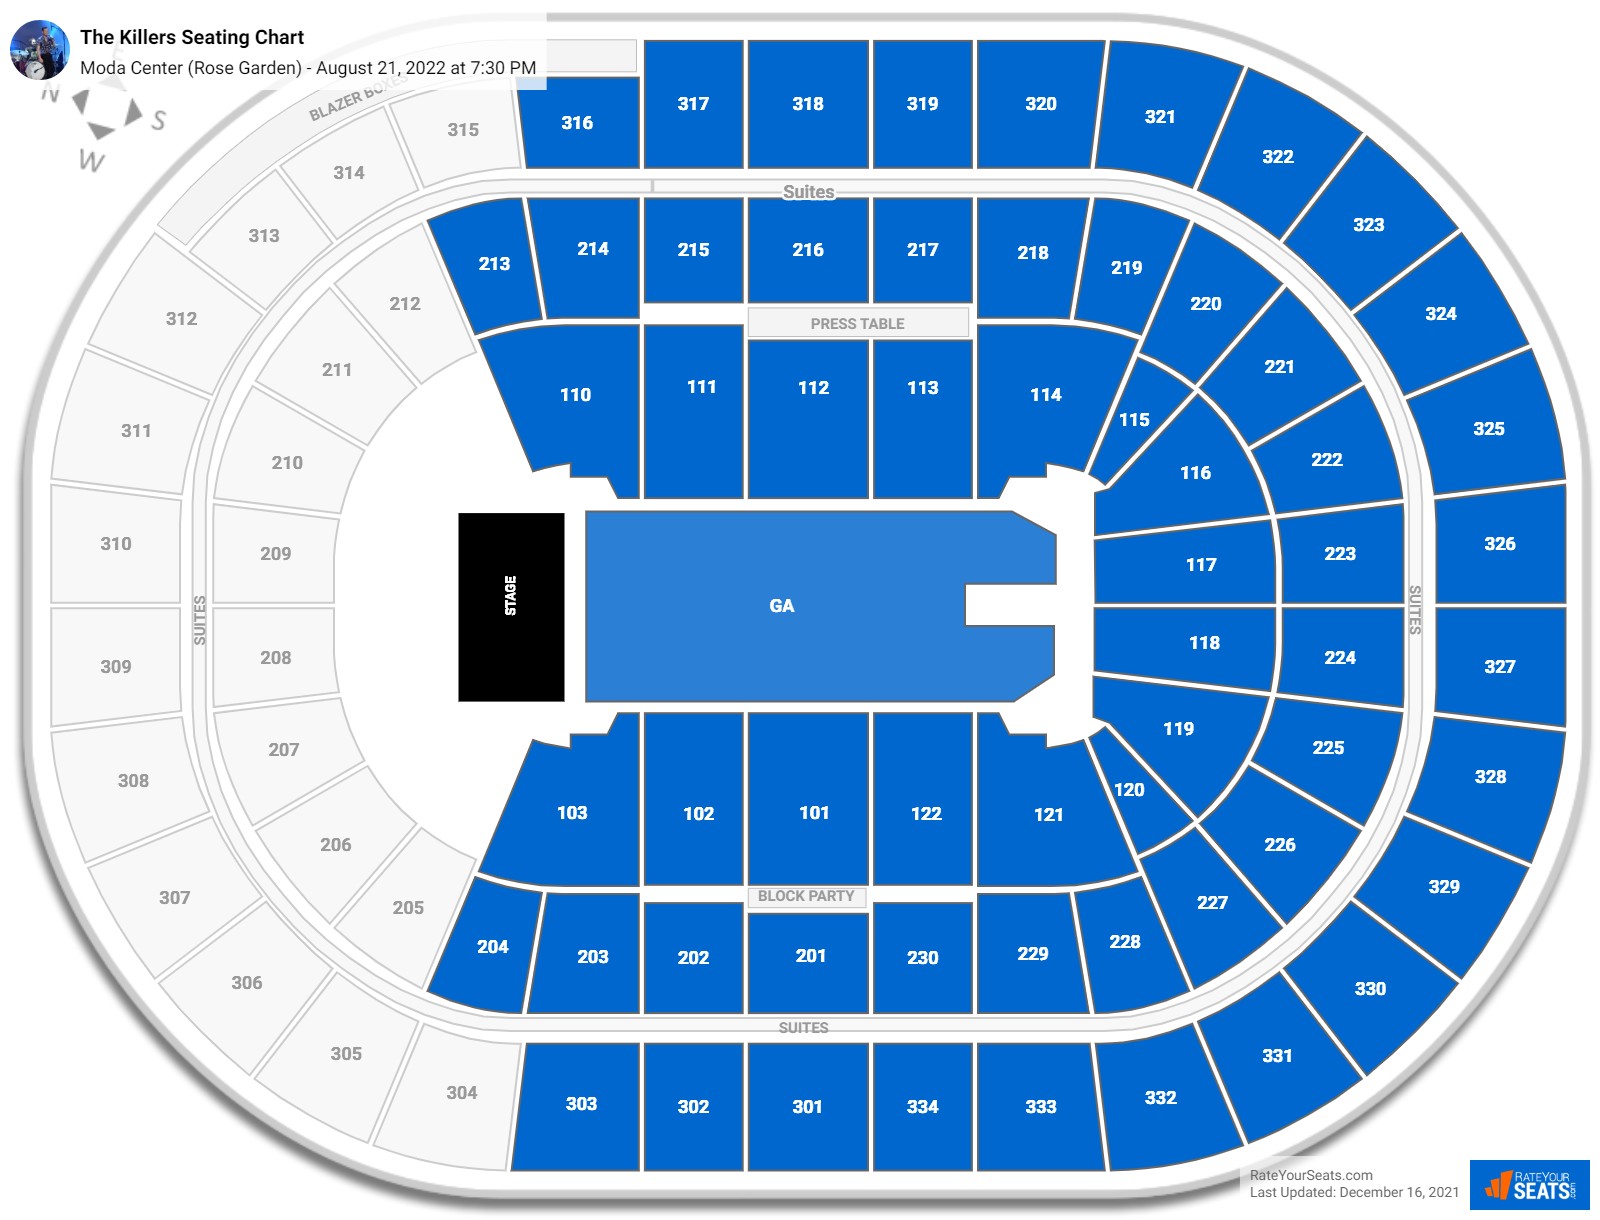 Moda Center Seating Charts for Concerts